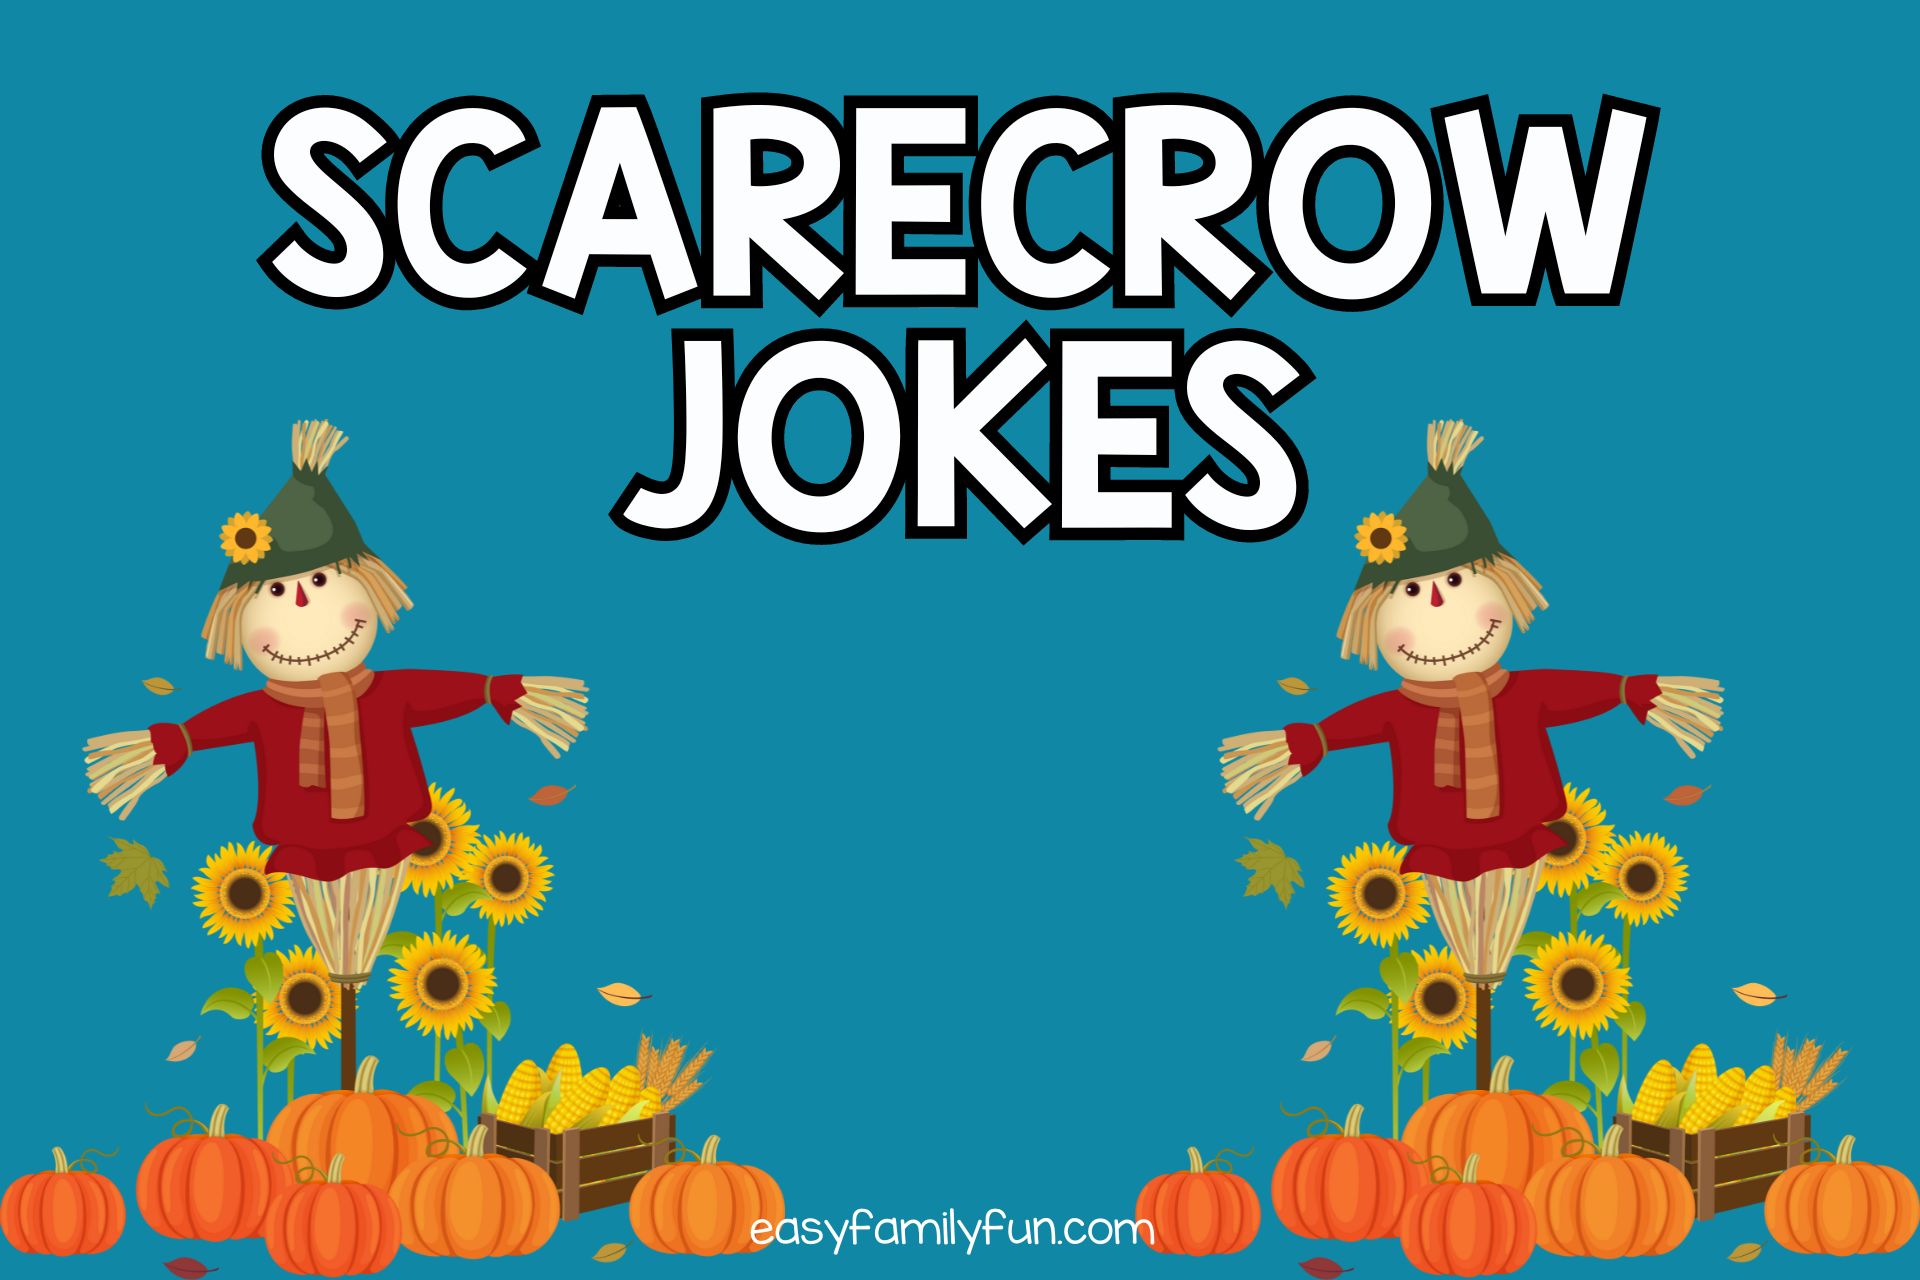 feature image in blue background, white text saying "scarecrow jokes"